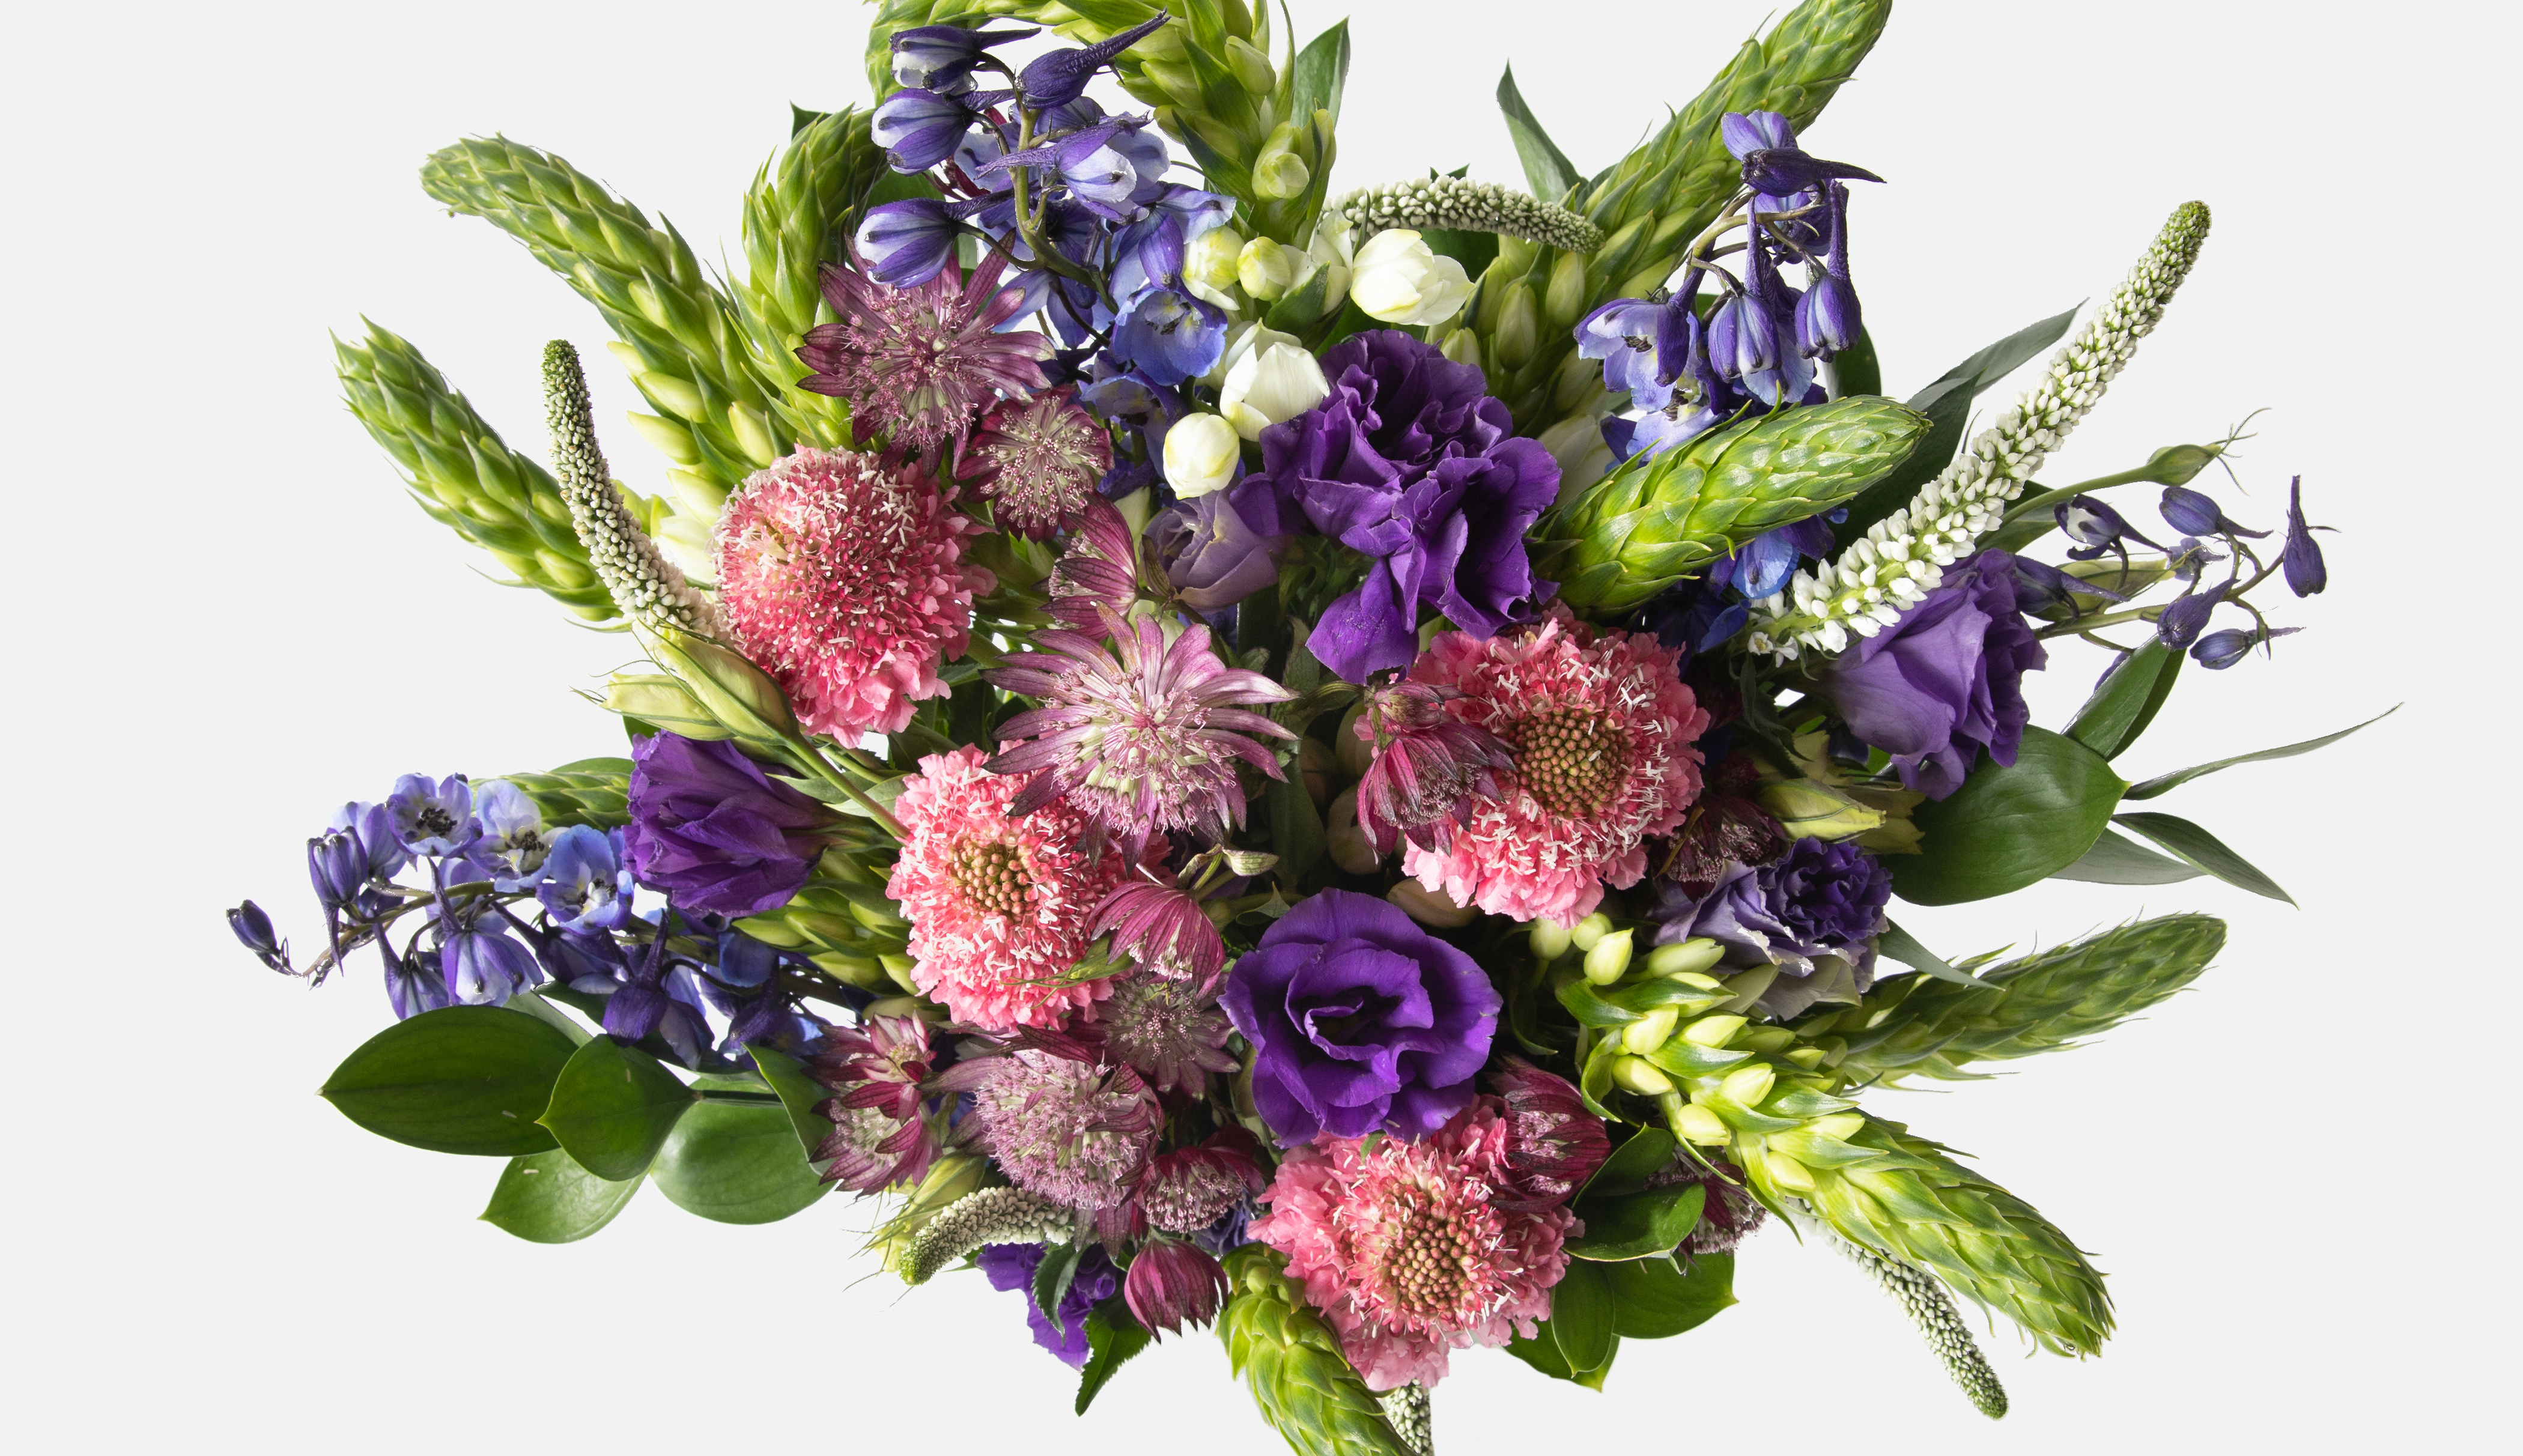 Top down view of a flower bouquet with delphiniums